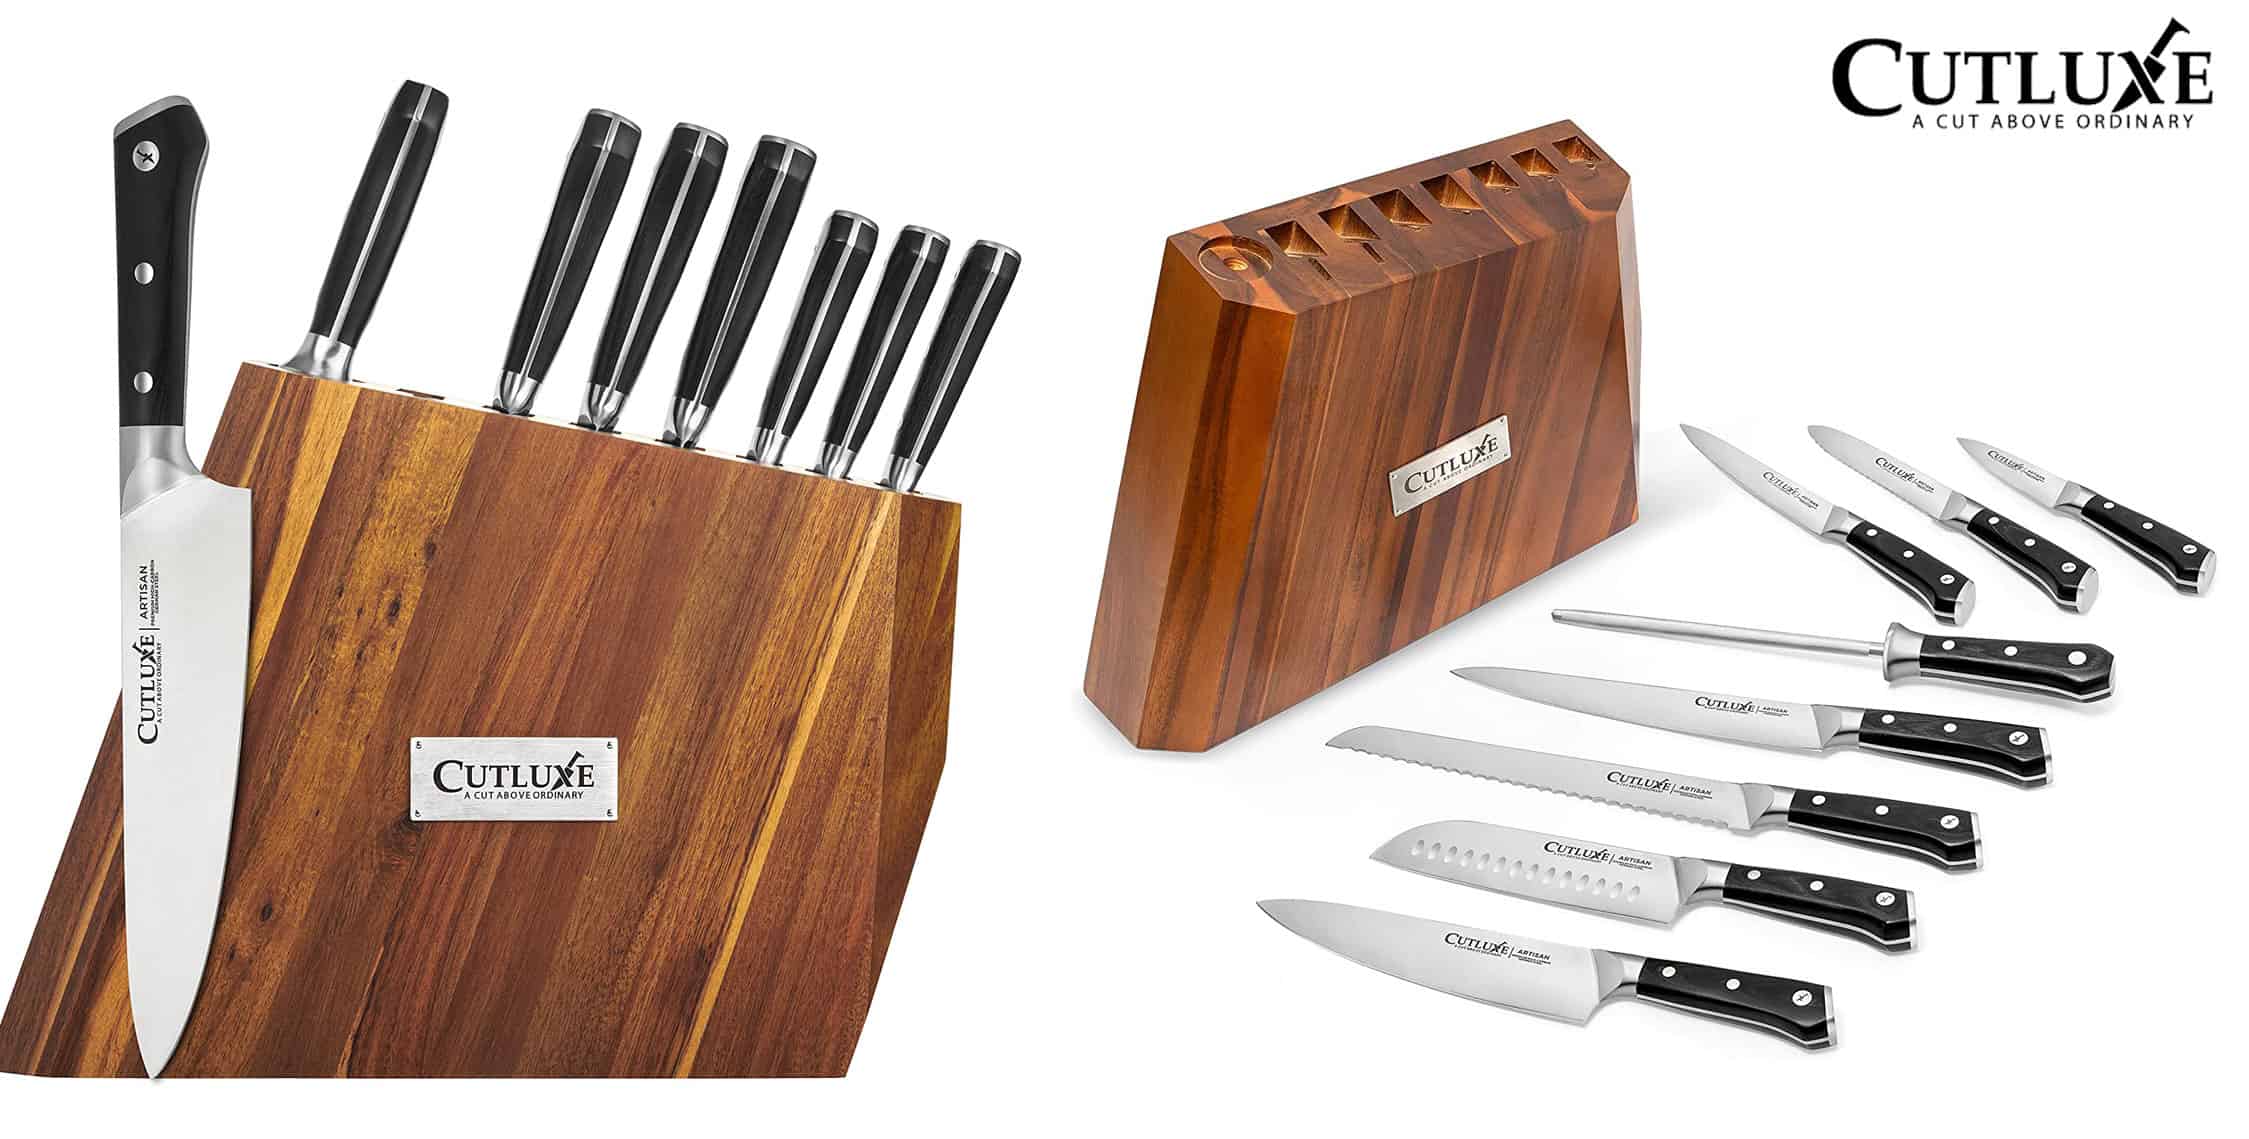 The Cutluxe Artisan 8-piece knife set is one of our favorite kitchen cutlery sets under $300